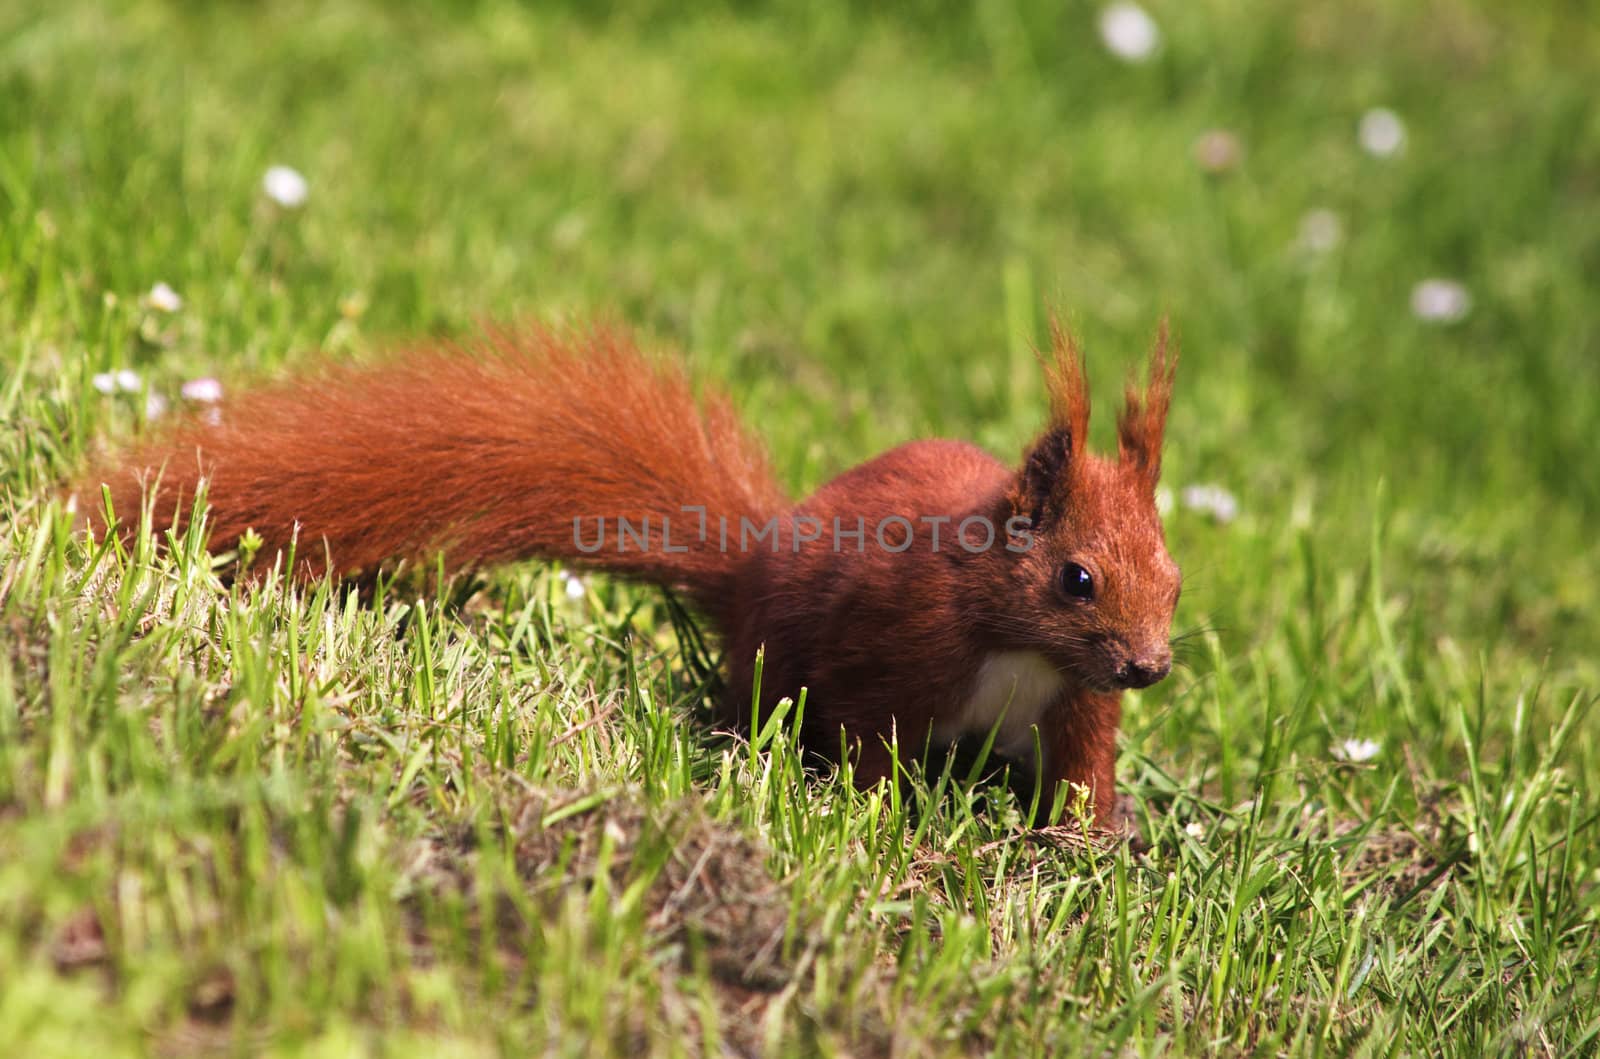 A red squirrel on a meadow with daisies.